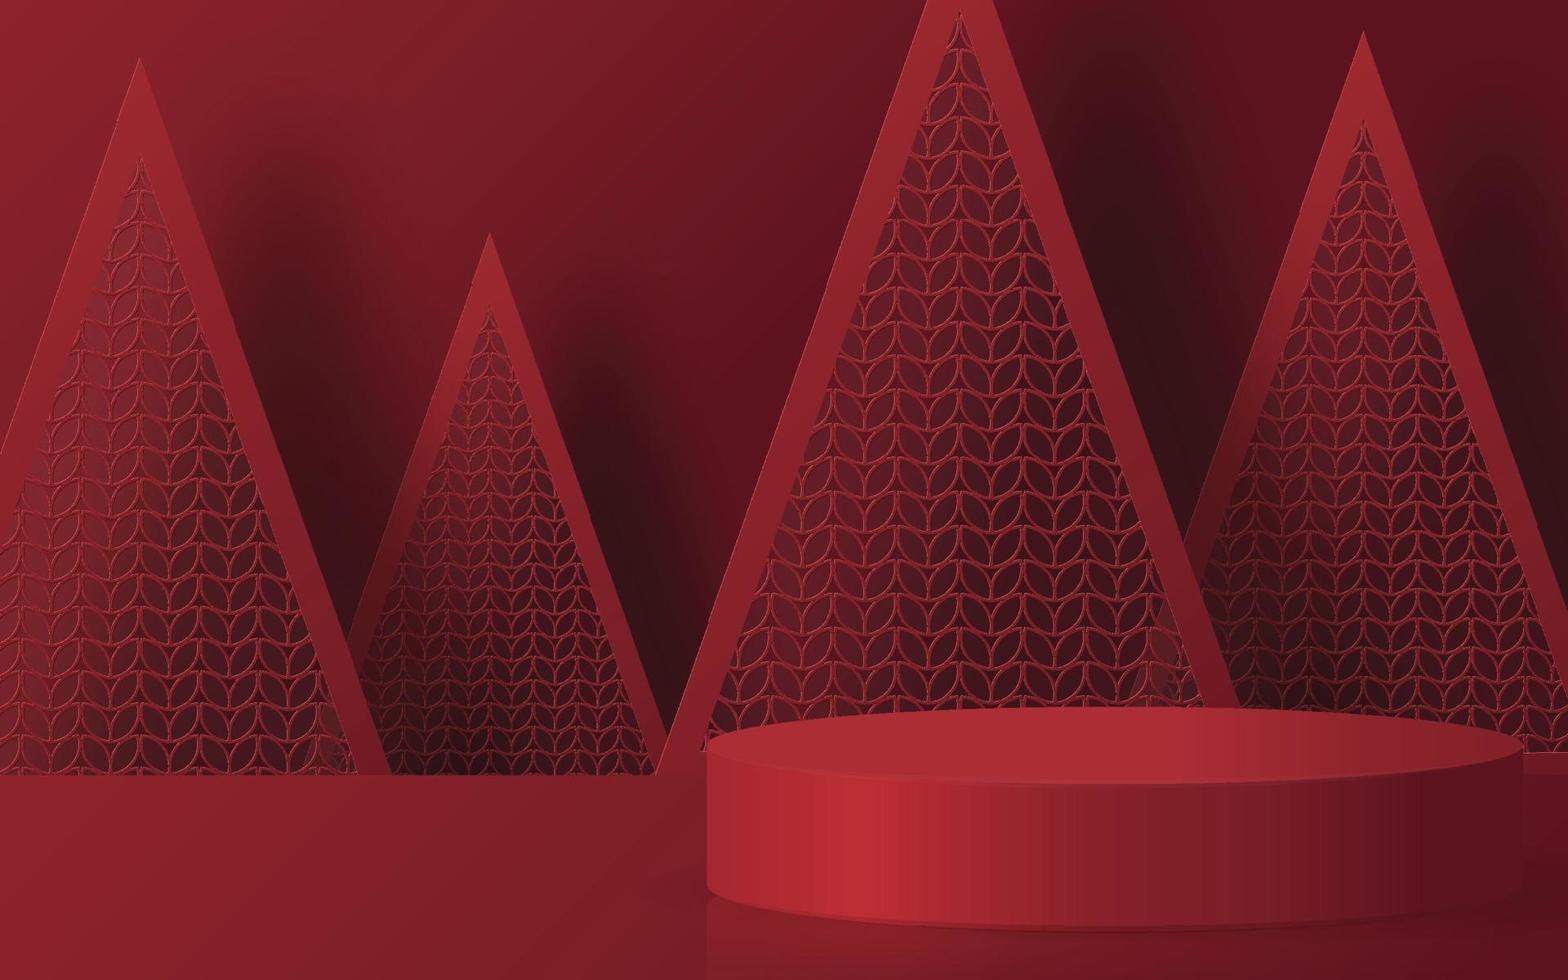 Christmas and New Year podium background. vector